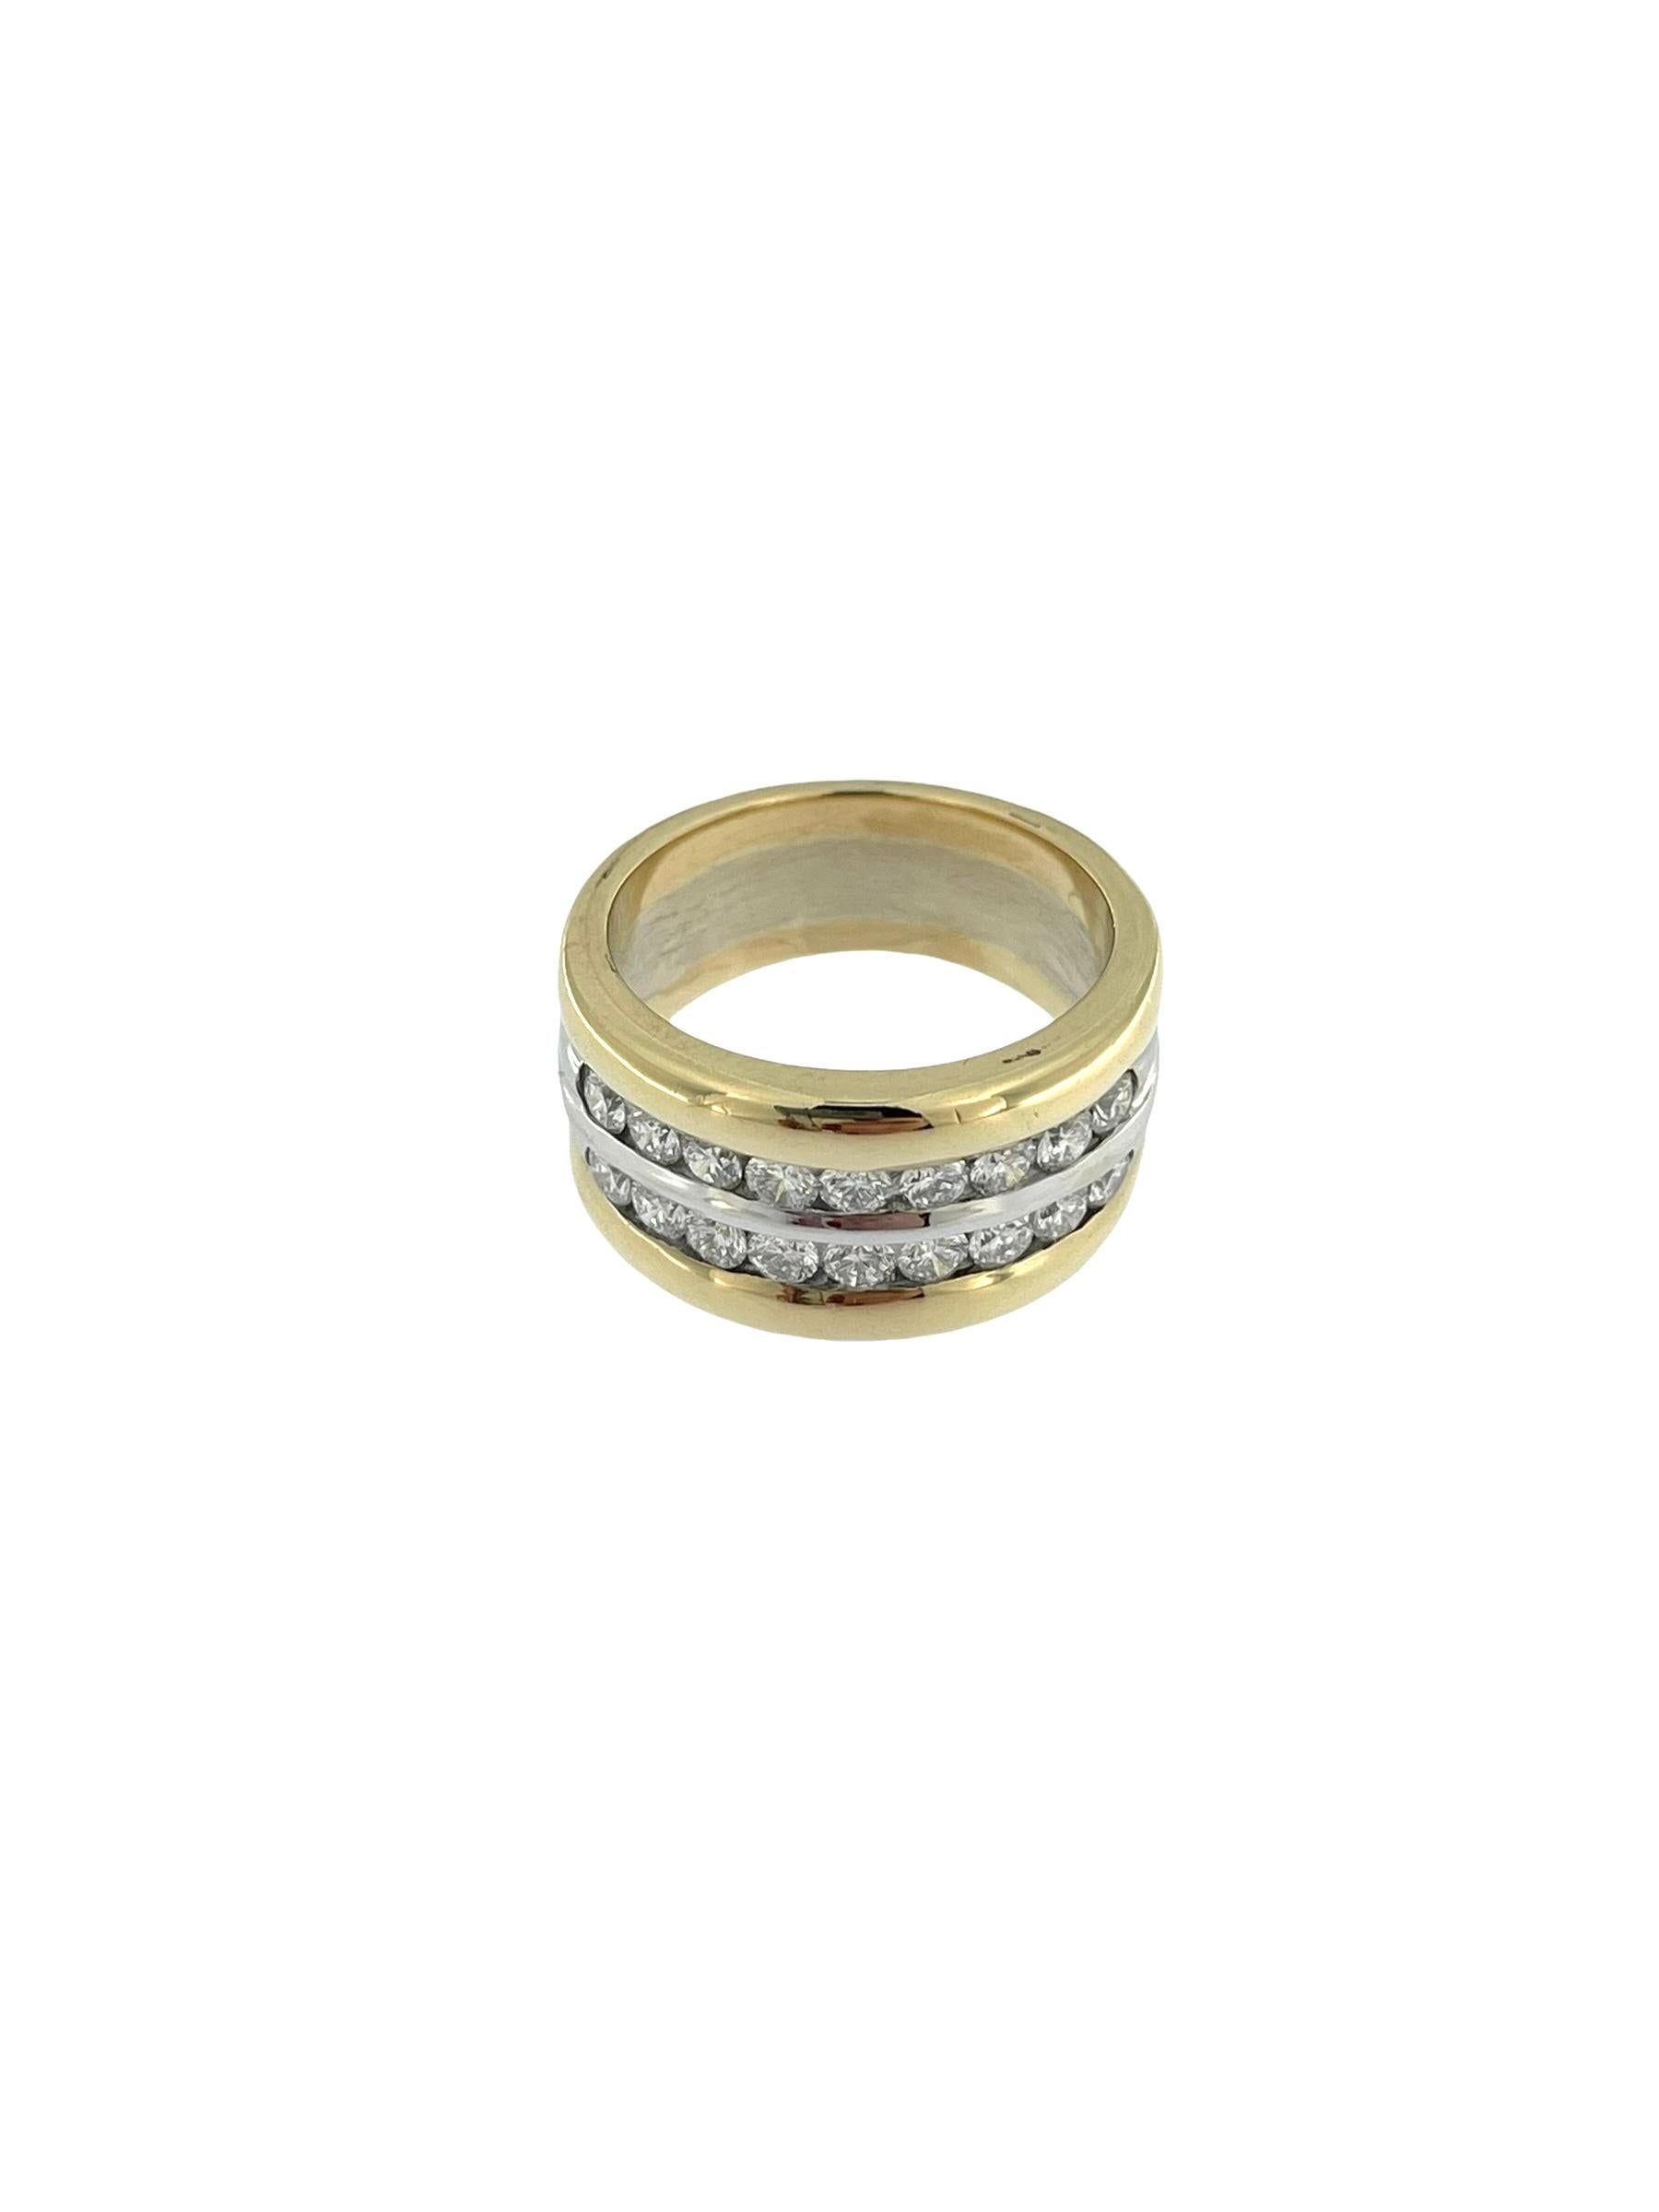 Modern HRD Certified Diamonds Yellow and White Gold Band Ring For Sale